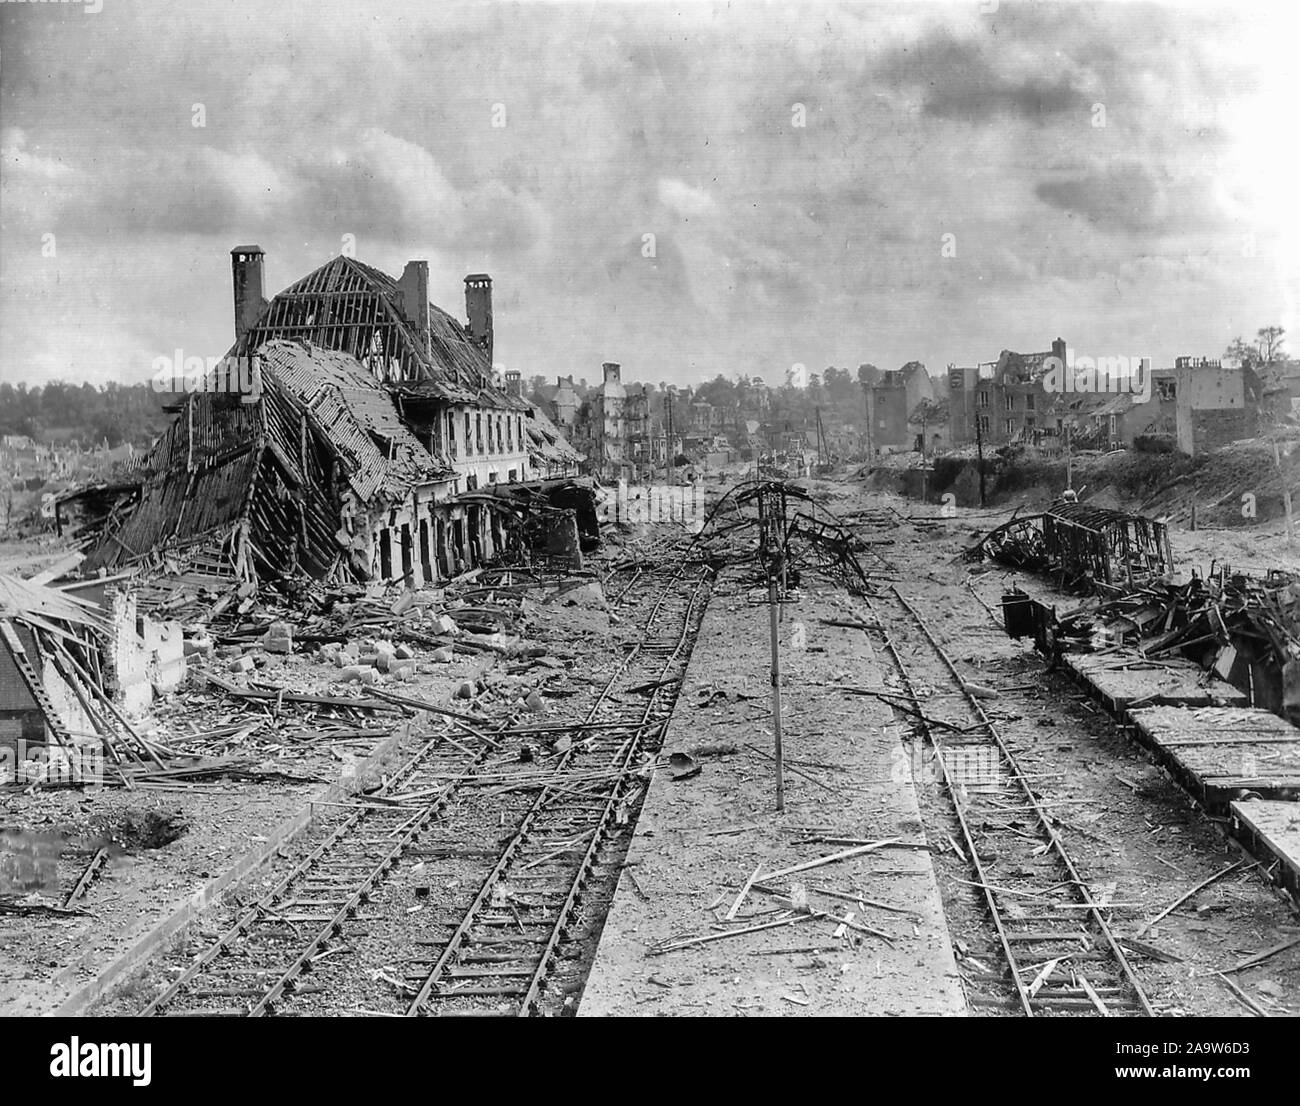 Railway station and city of Saint-Lô (Normandy) destroyed, 1944 Stock Photo